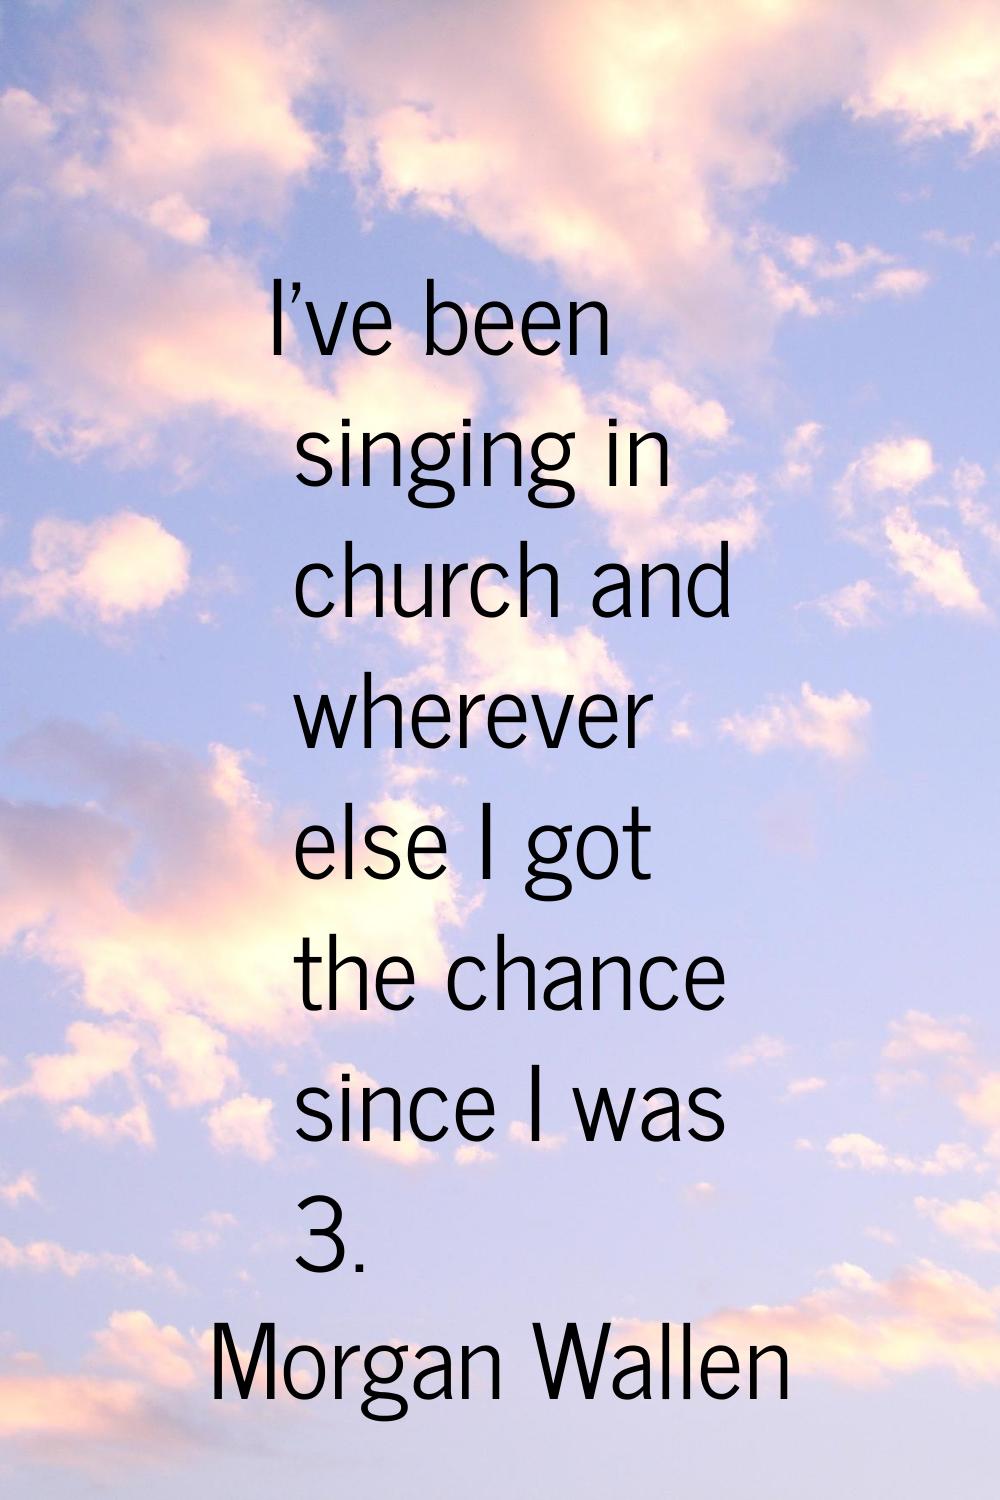 I've been singing in church and wherever else I got the chance since I was 3.